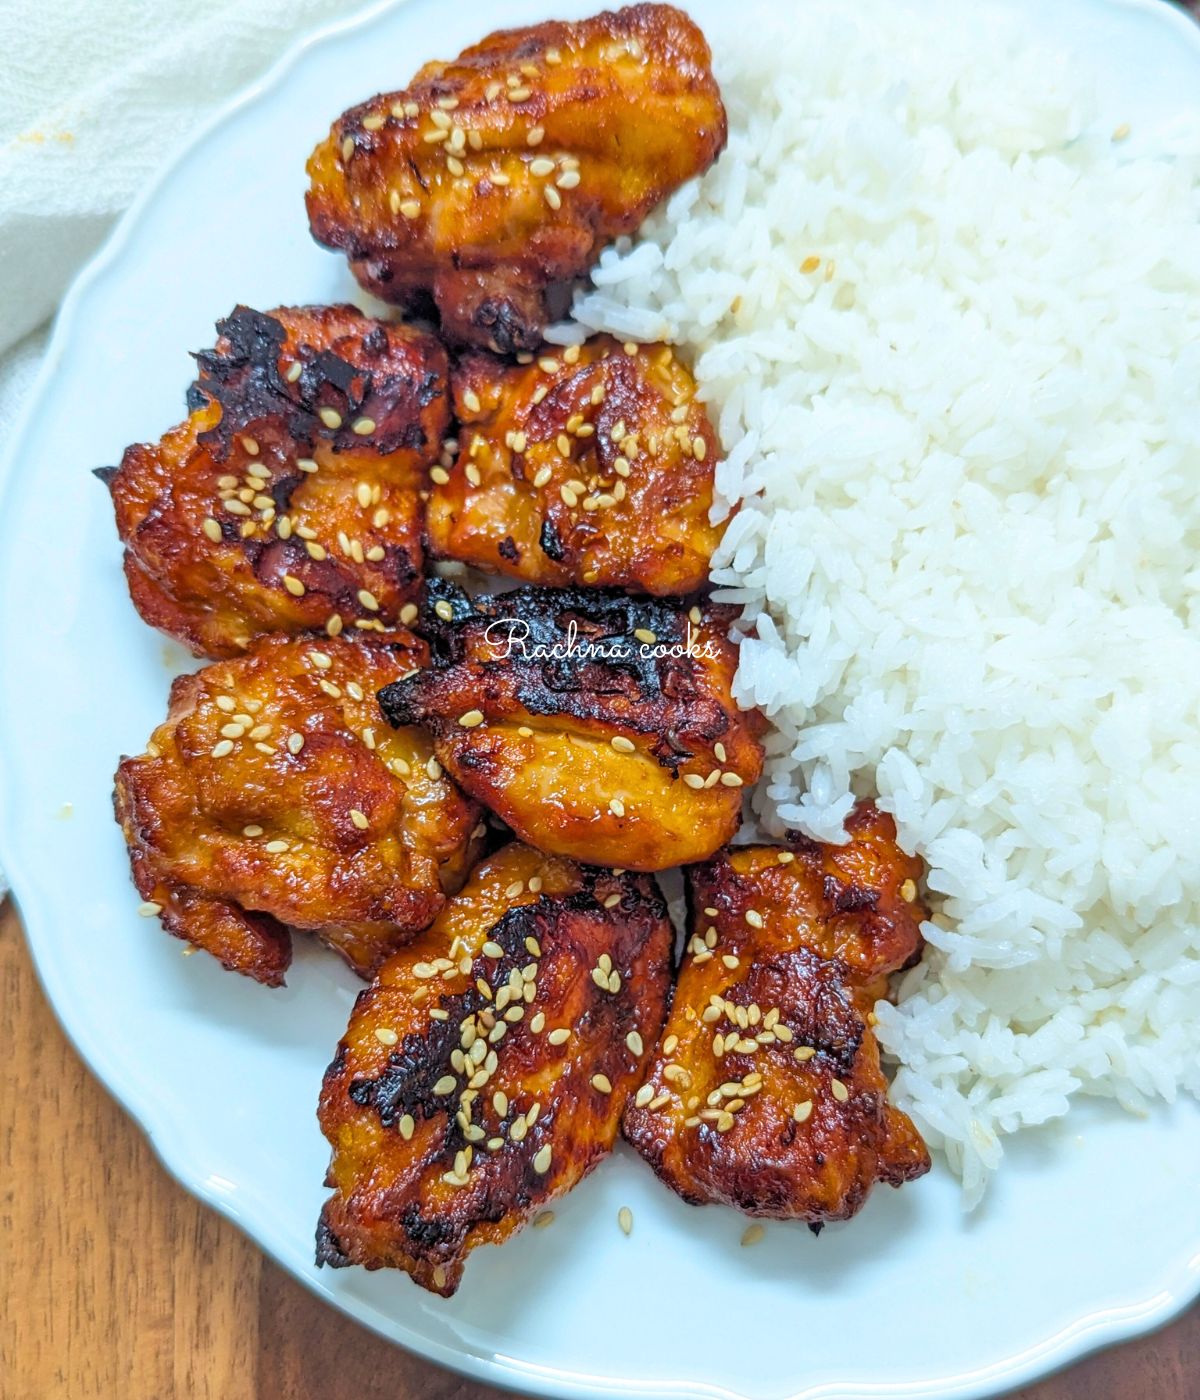 teriyaki chicken bites served with rice on a plate.